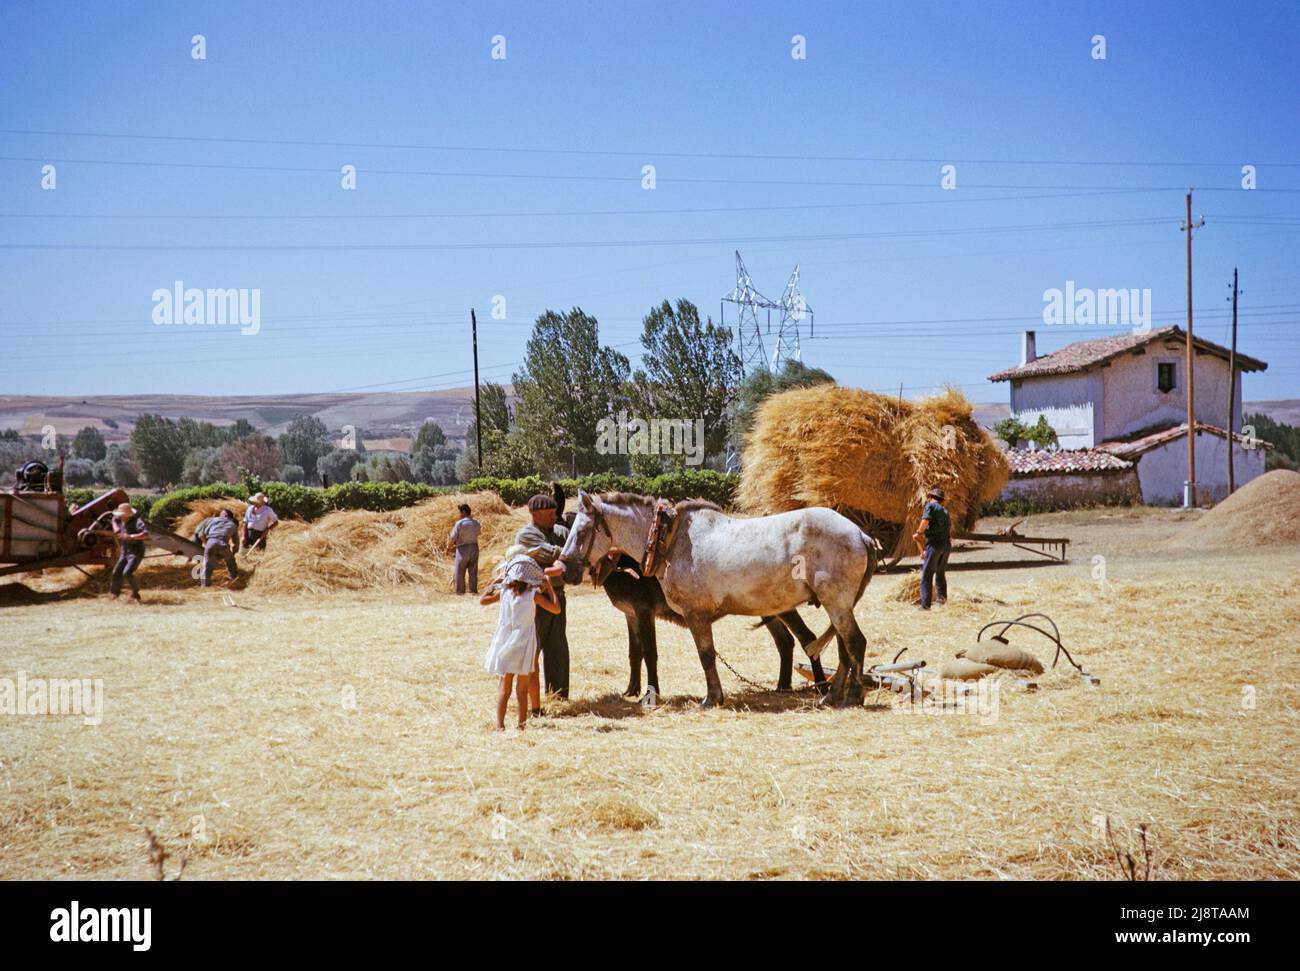 Harvesting threshing wheat by hand and using horses, Spain 1964 location unspecified, Stock Photo